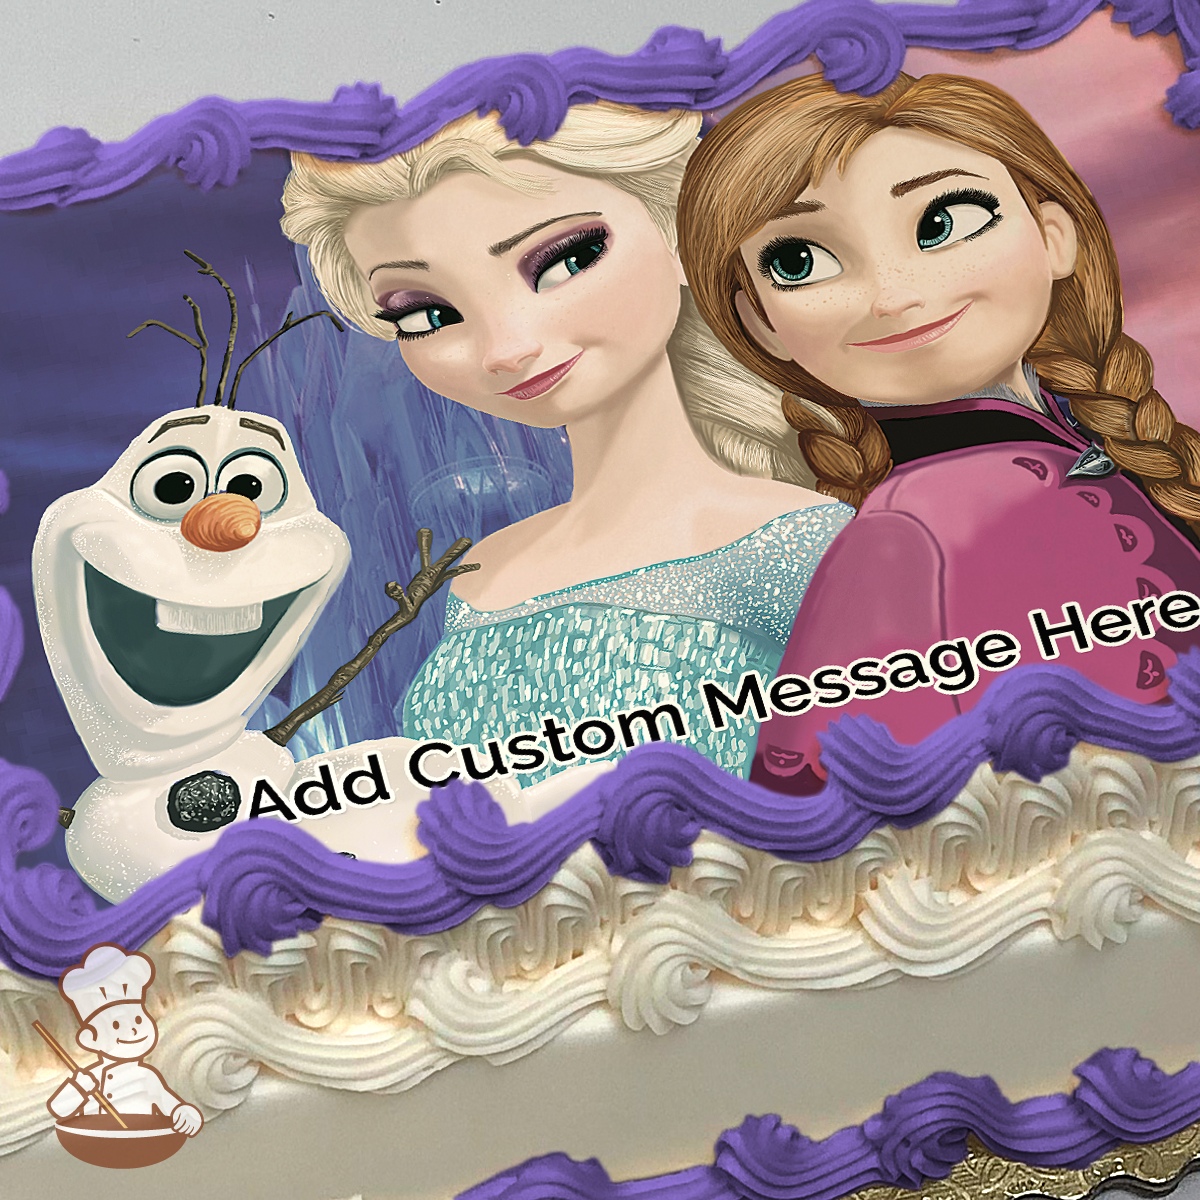 Elsa, Anna and Olaf printed on extra cake layer and decorated on sheet cake.